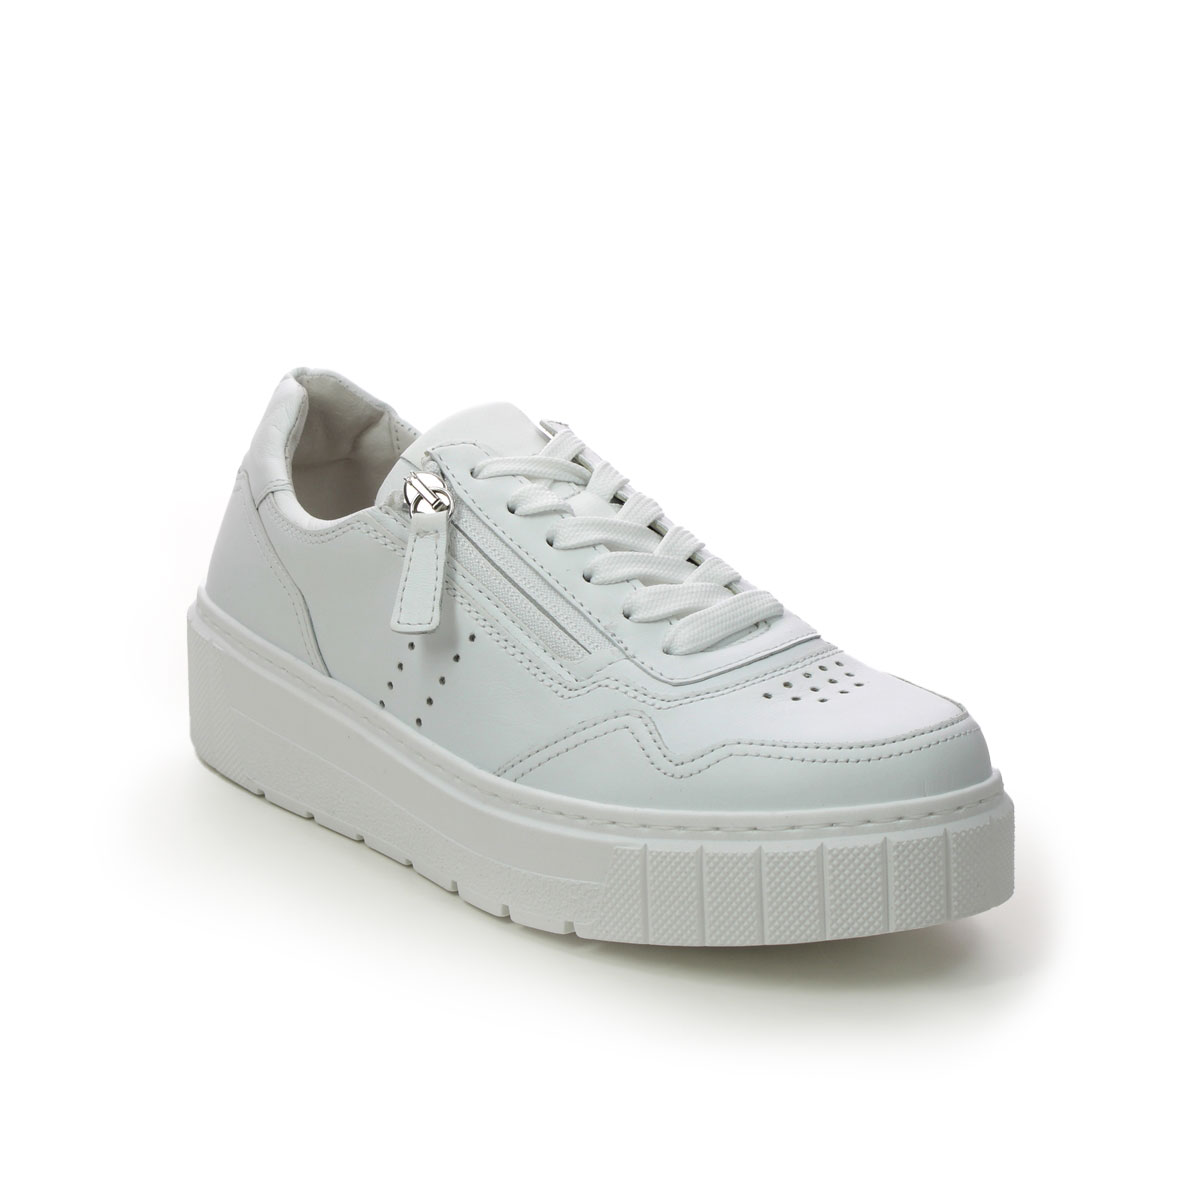 Gabor Farica Zip White Leather Womens Trainers 26.418.50 In Size 6.5 In Plain White Leather  Womens Trainers In Soft White Leather Leather